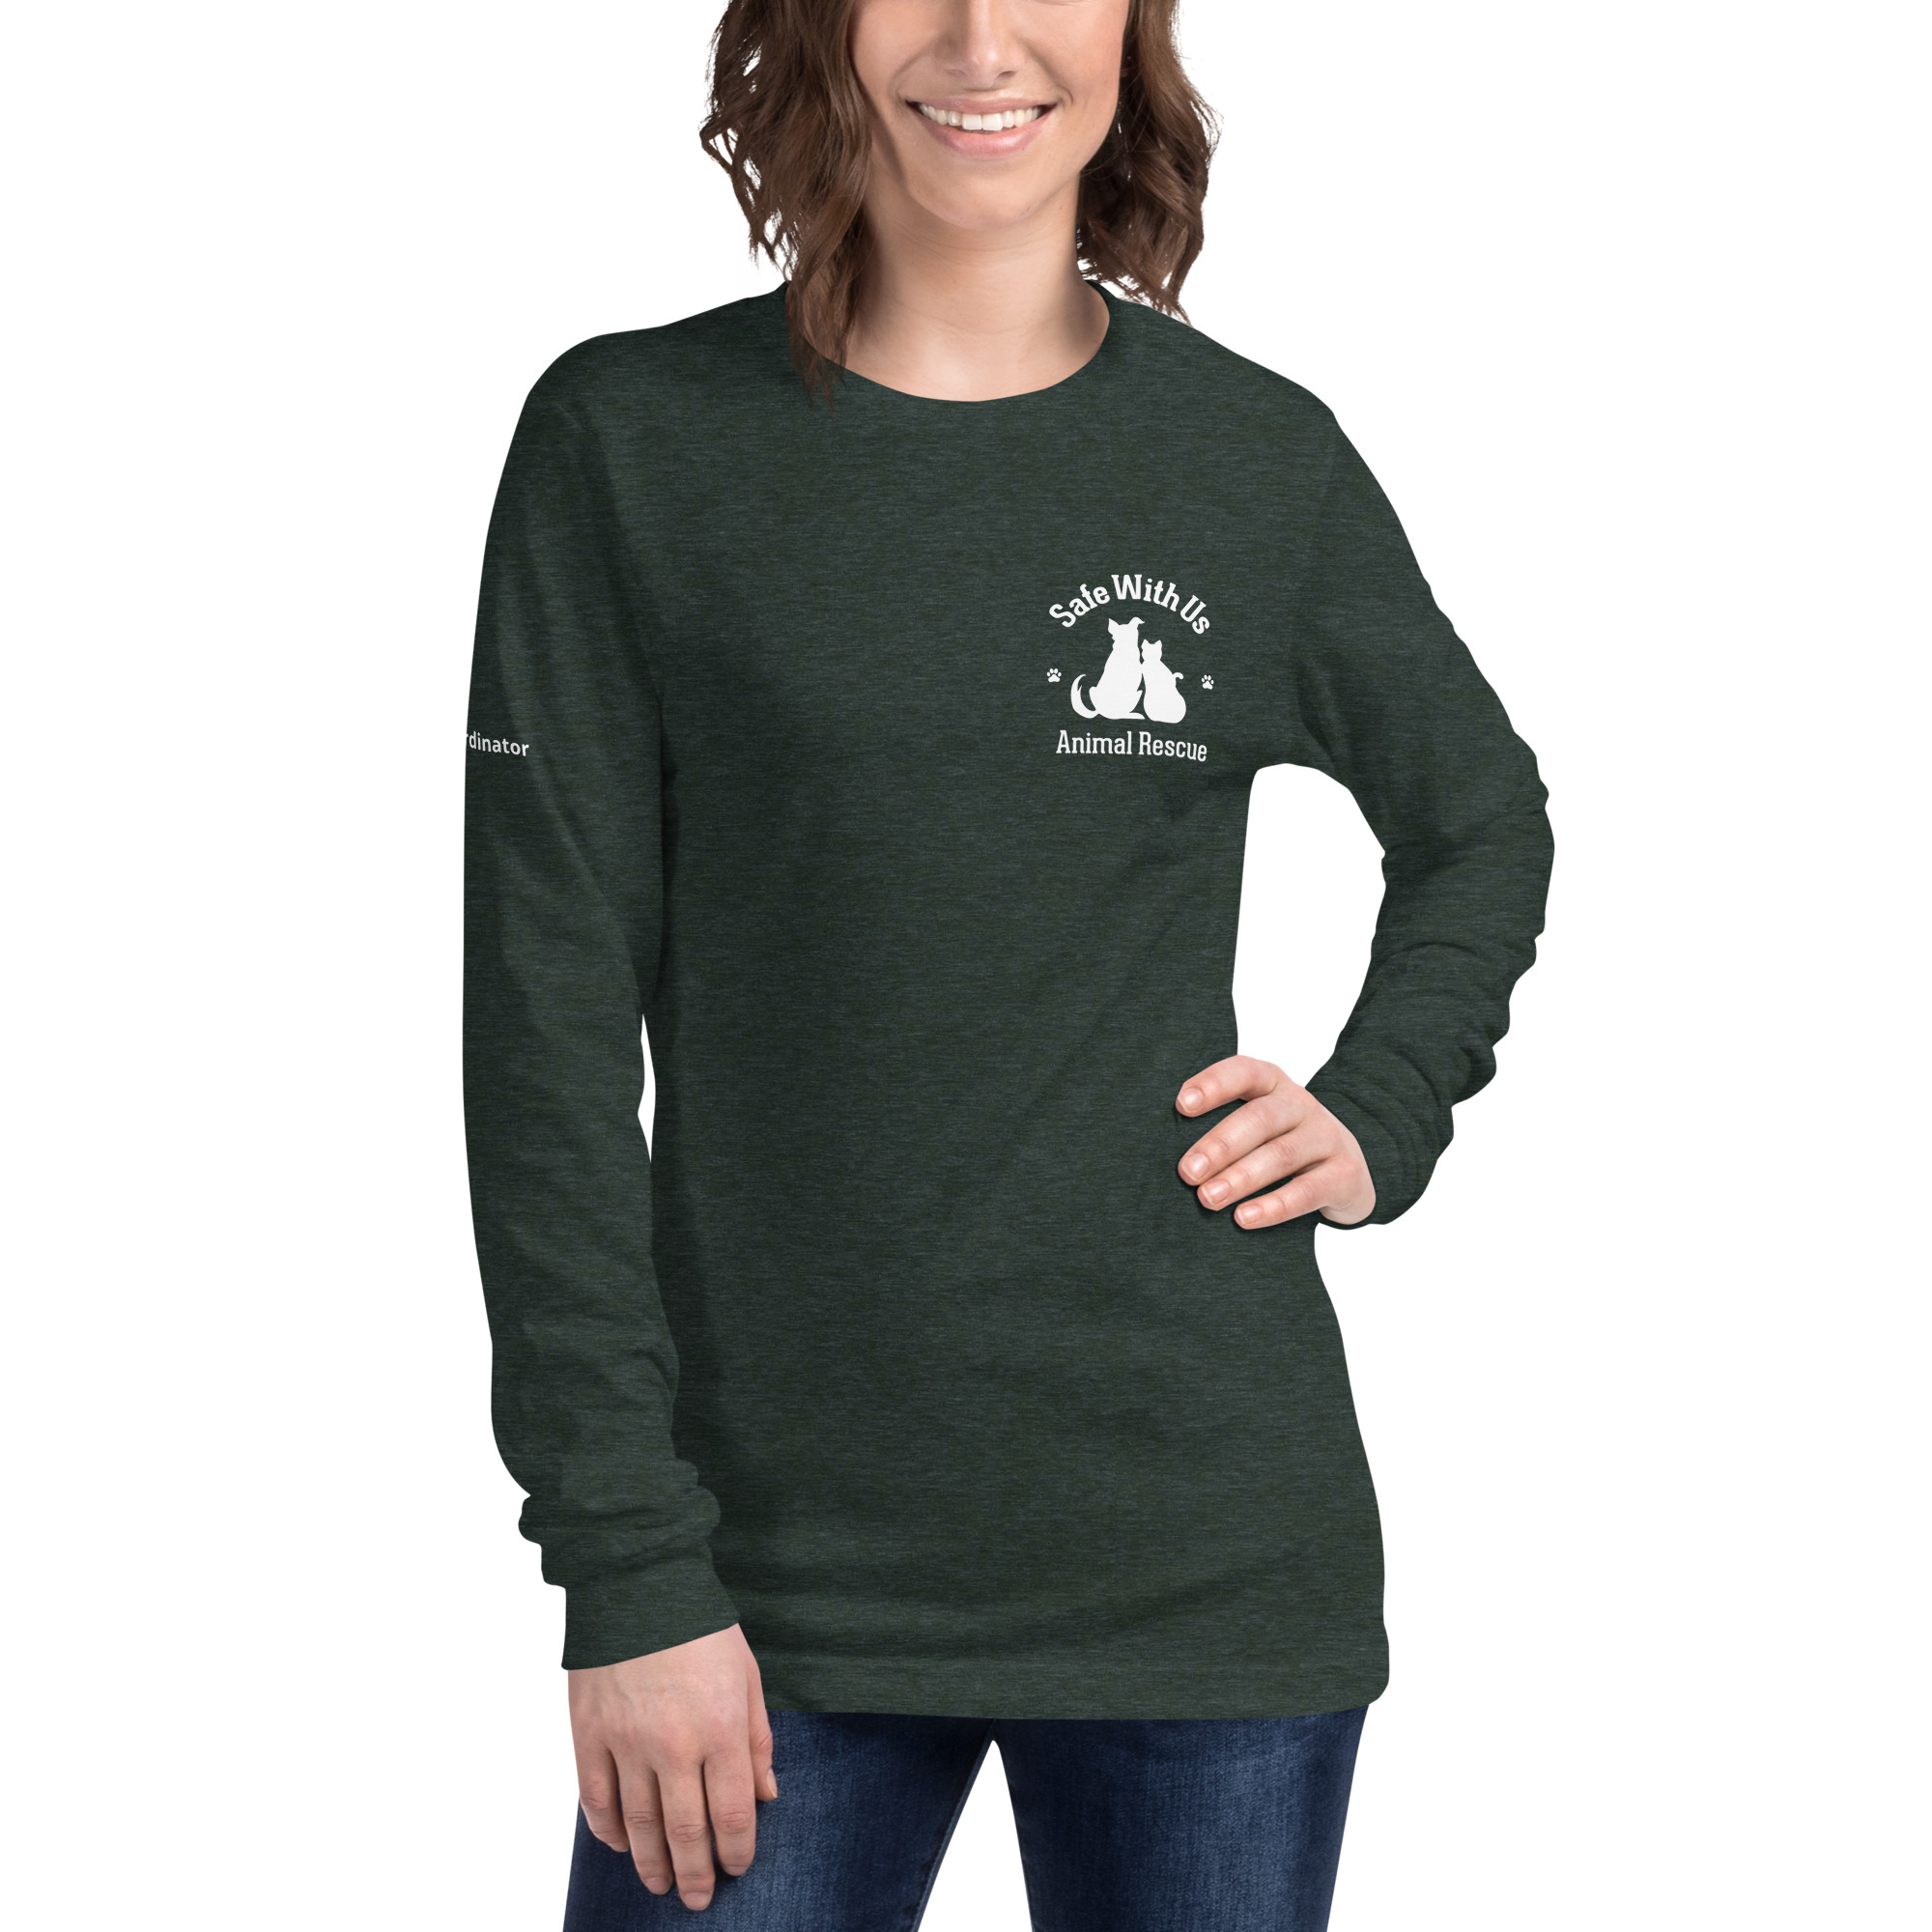 unisex-long-sleeve-tee-heather-forest-front-64203a3c4e695.jpg